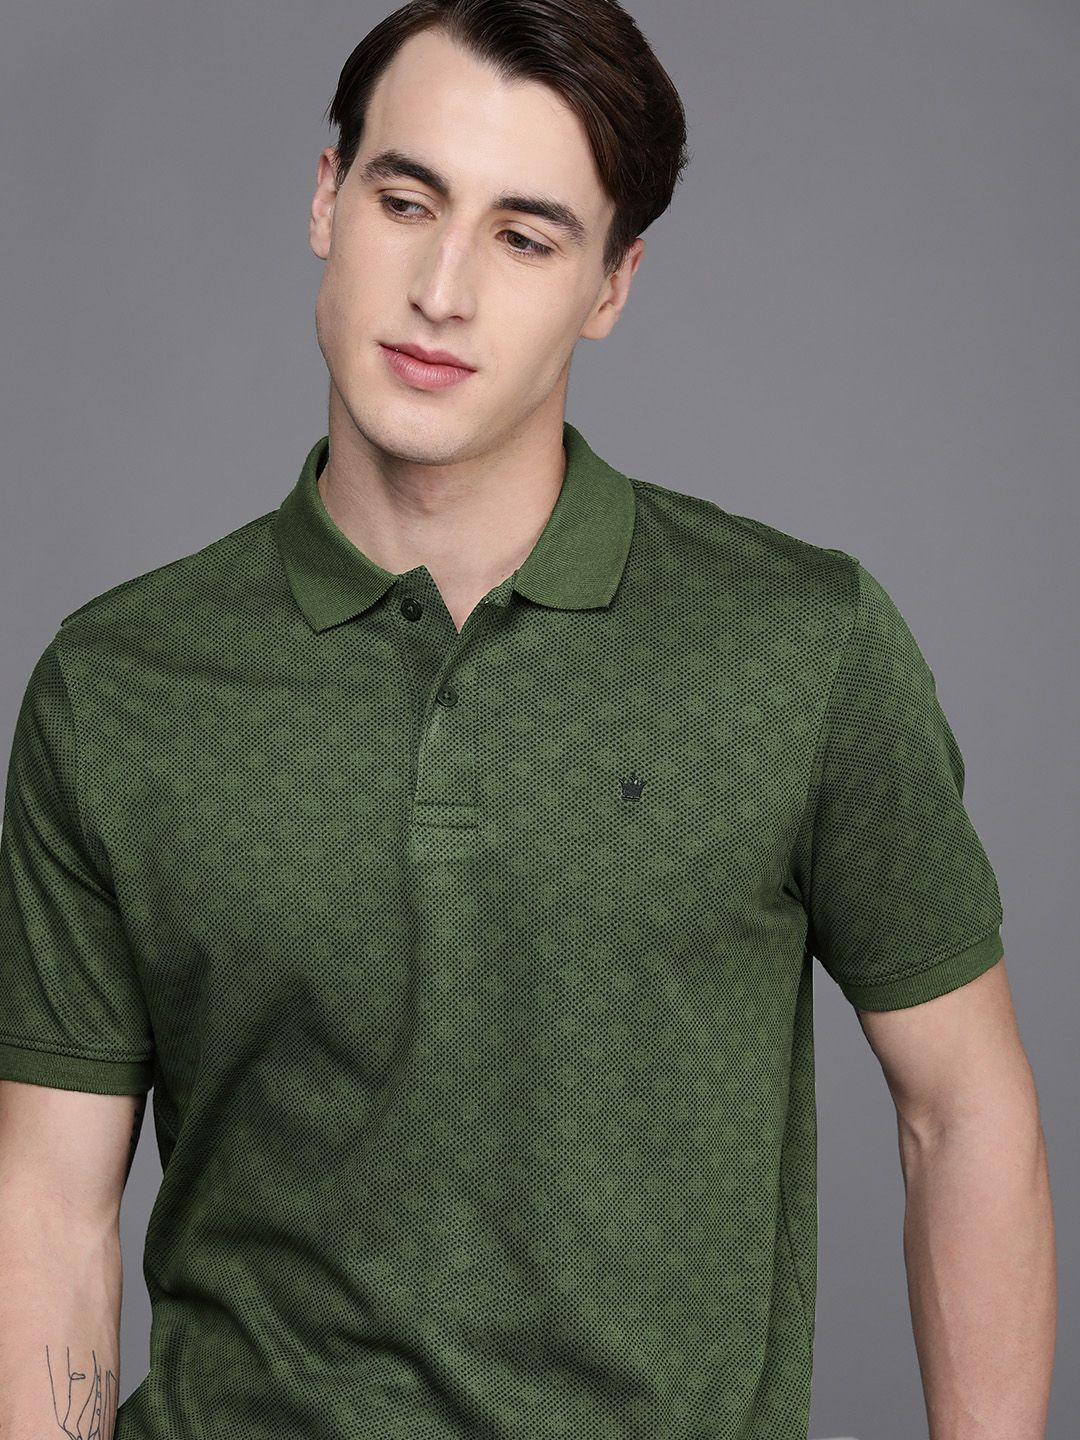 louis philippe men olive green & black printed polo collar t-shirt